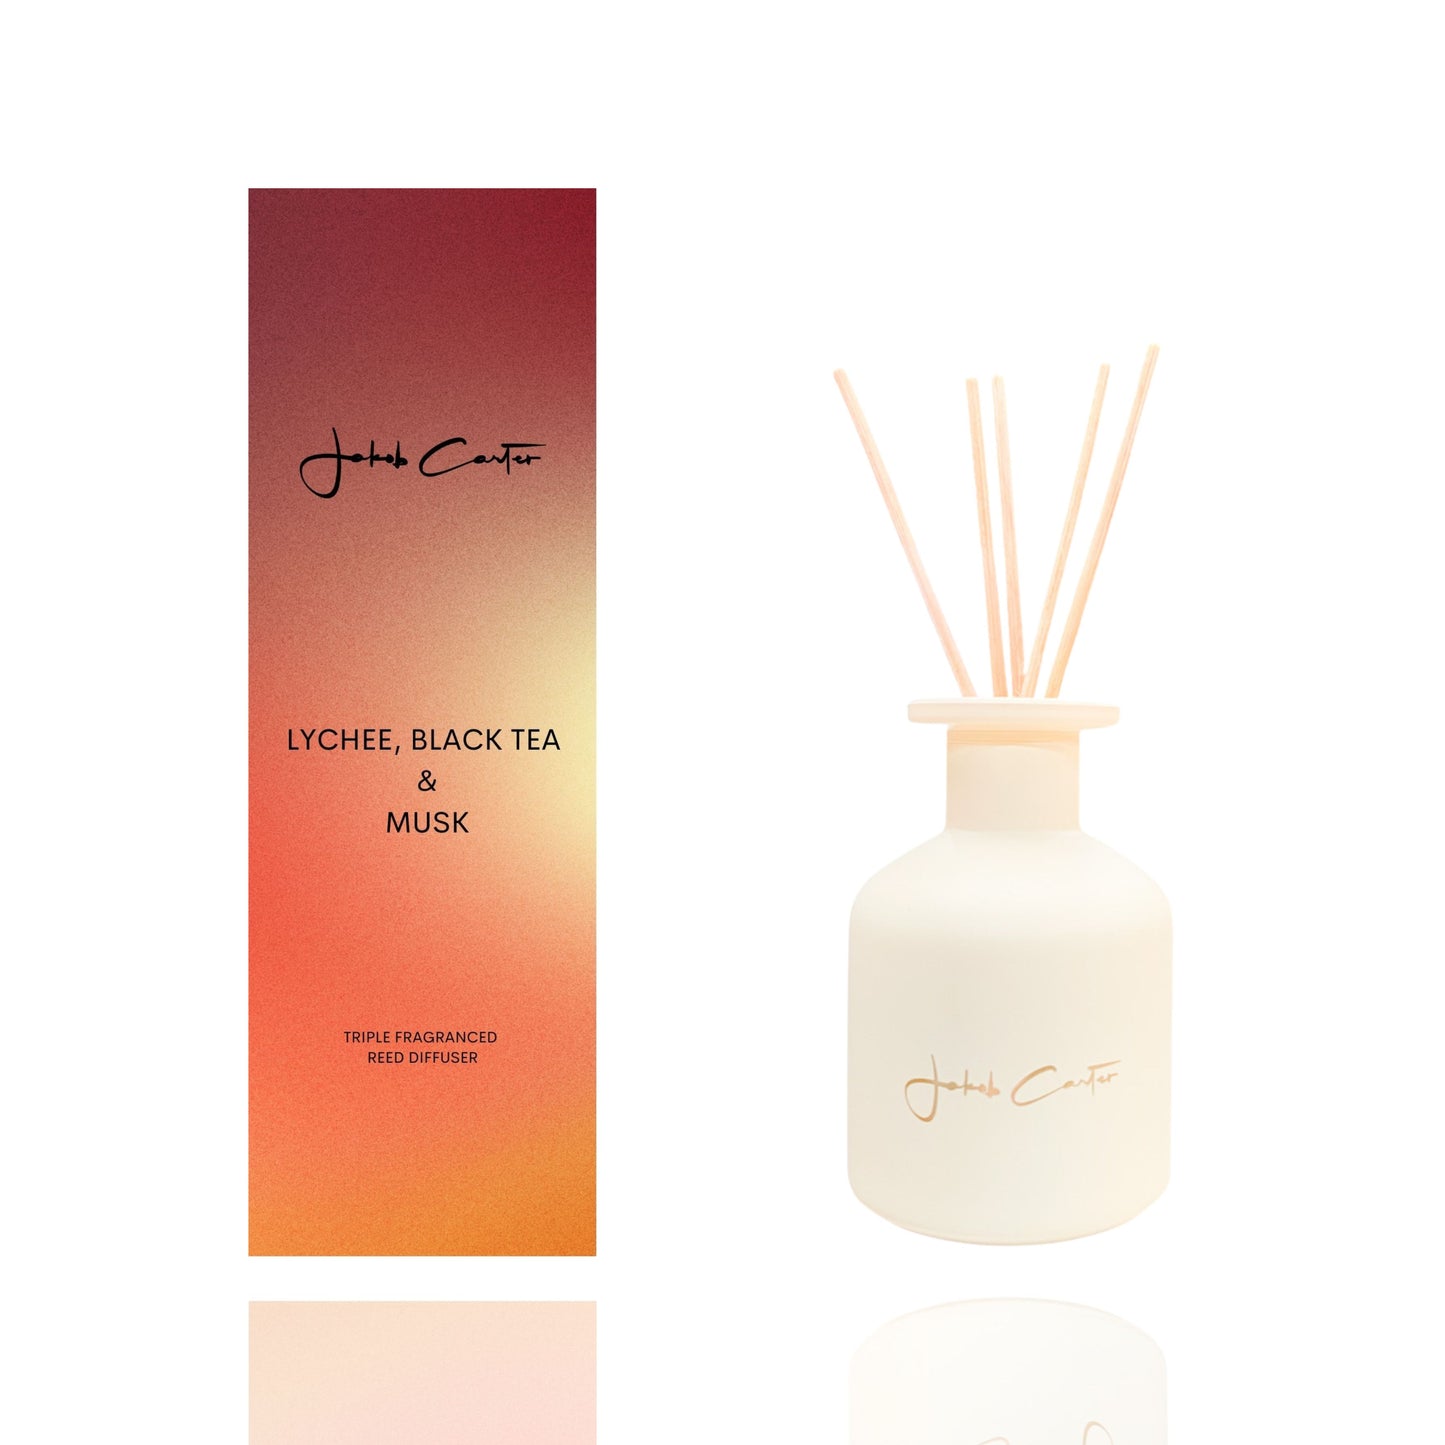 Jakob Carter Lychee, Black Tea and Musk reed diffuser